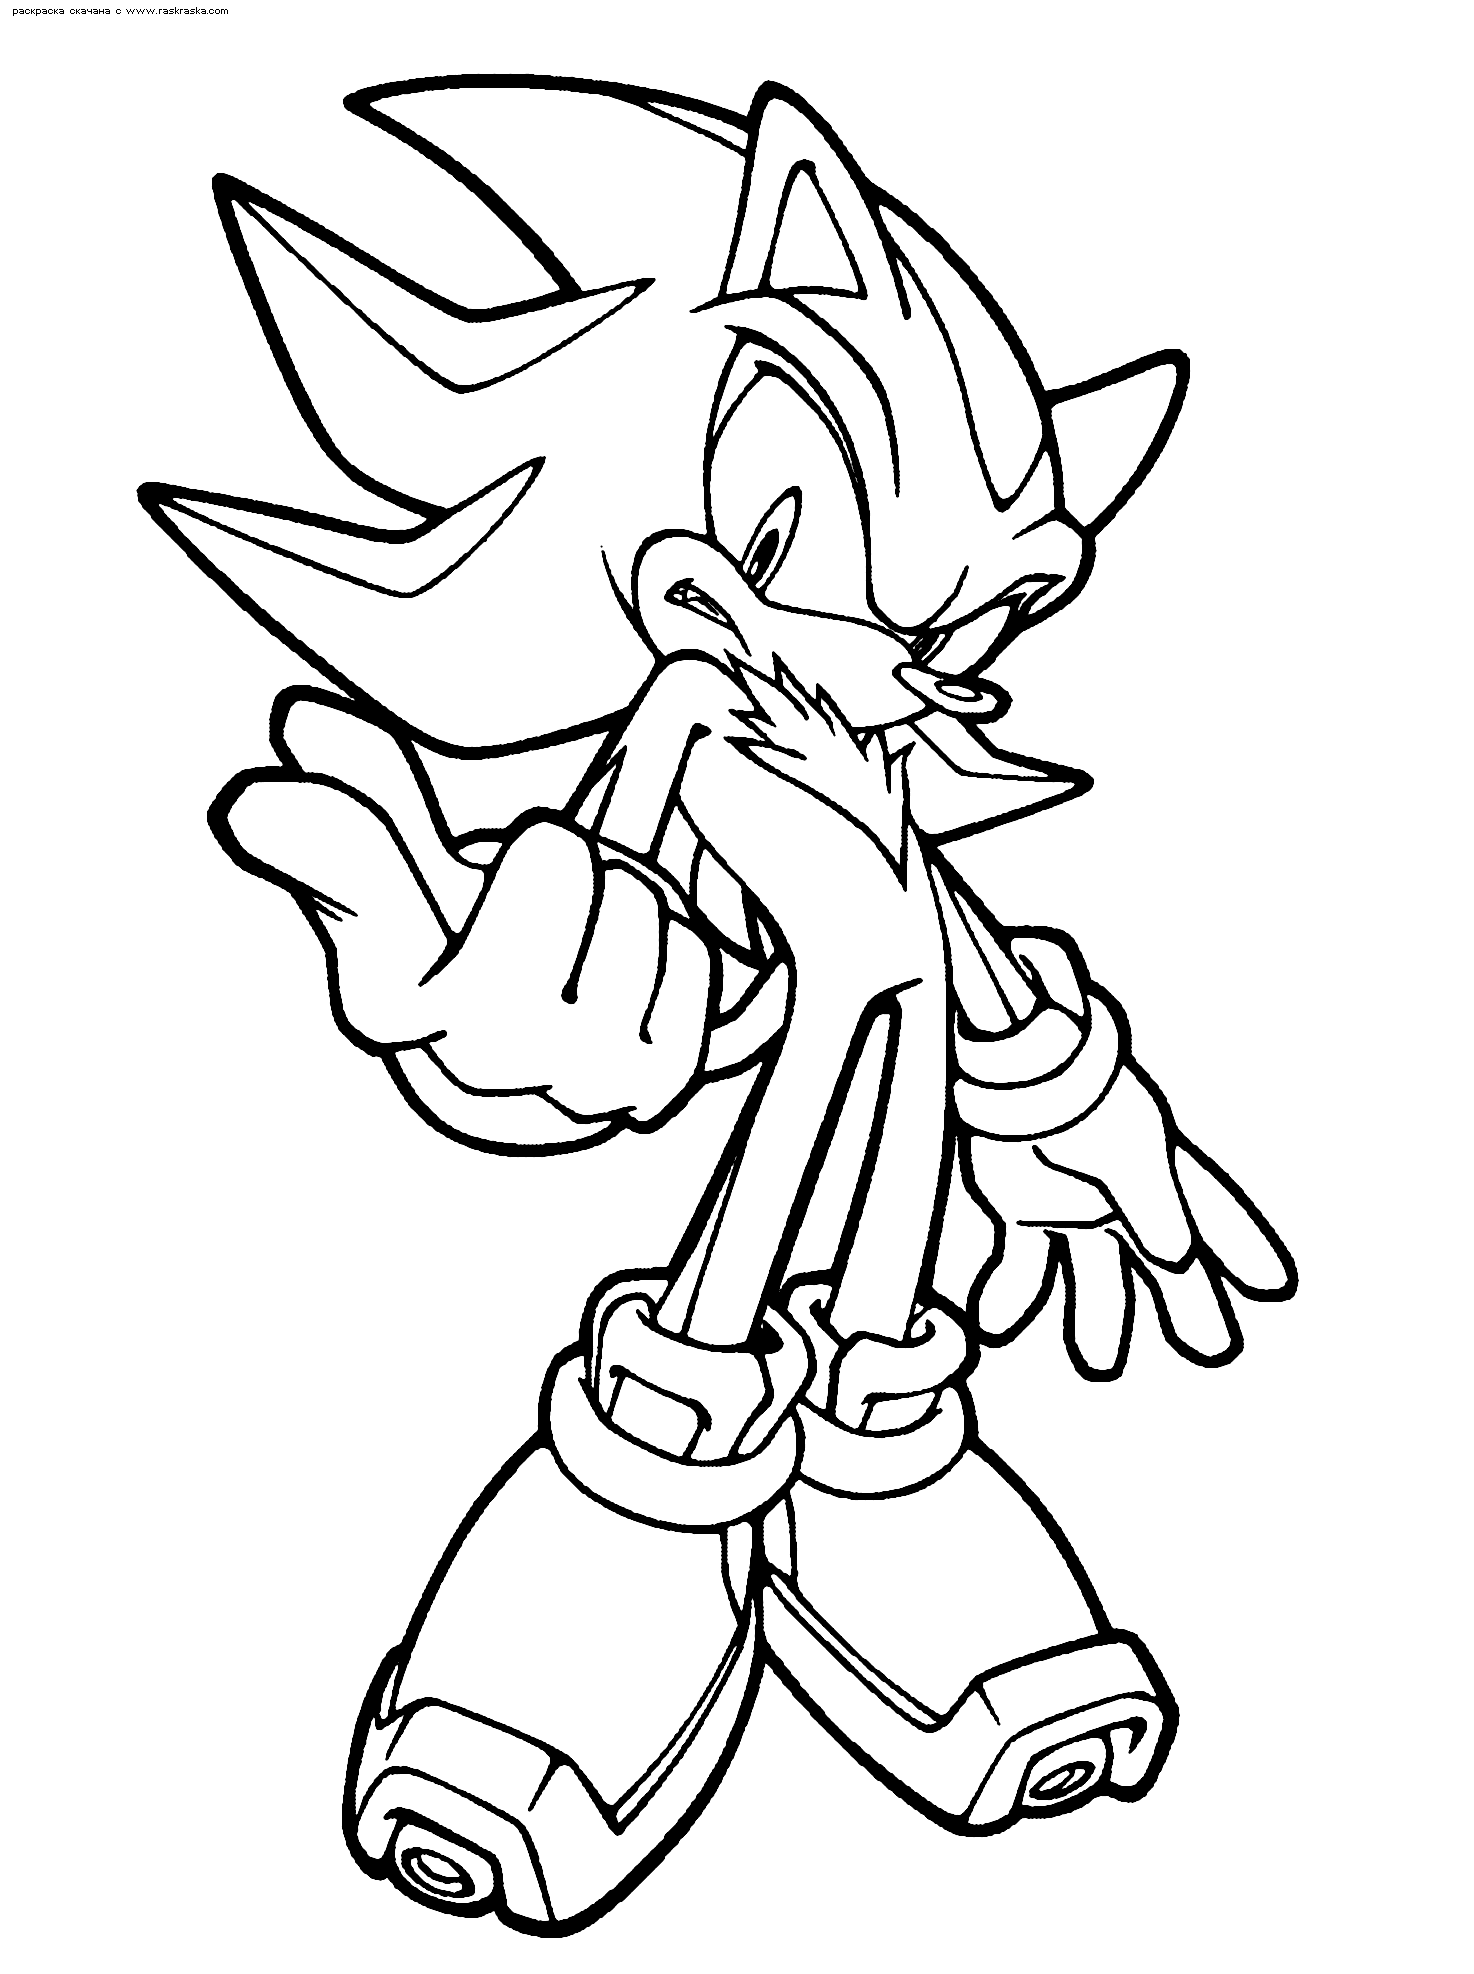 Sonic coloring pages | disney coloring pages for kids | color pages | coloring pages to print | kids coloring pages | #16